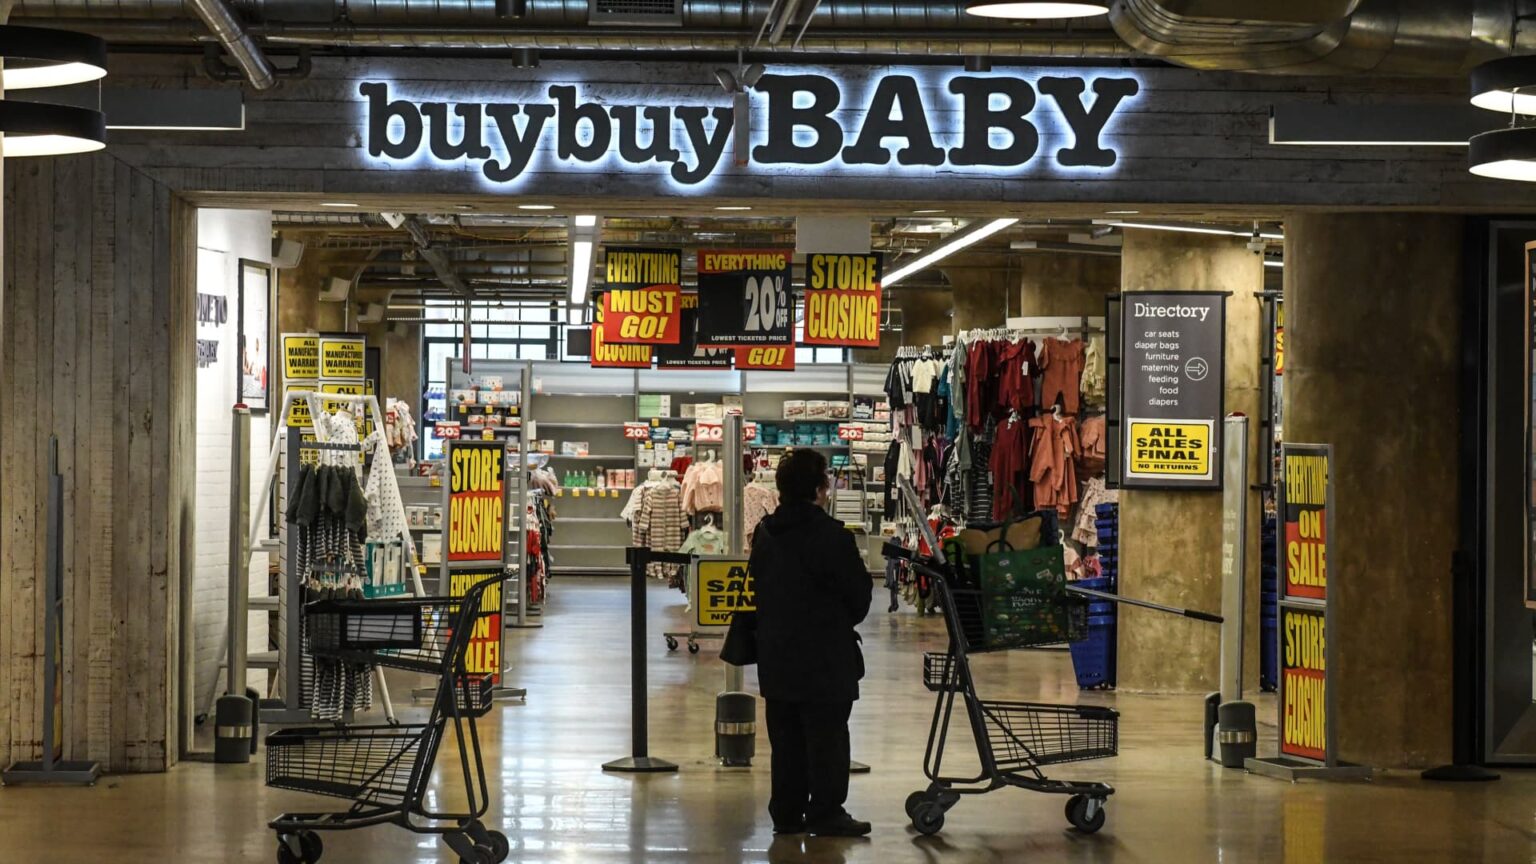 Buy Buy Baby auction cancelled, but bidders are still interested